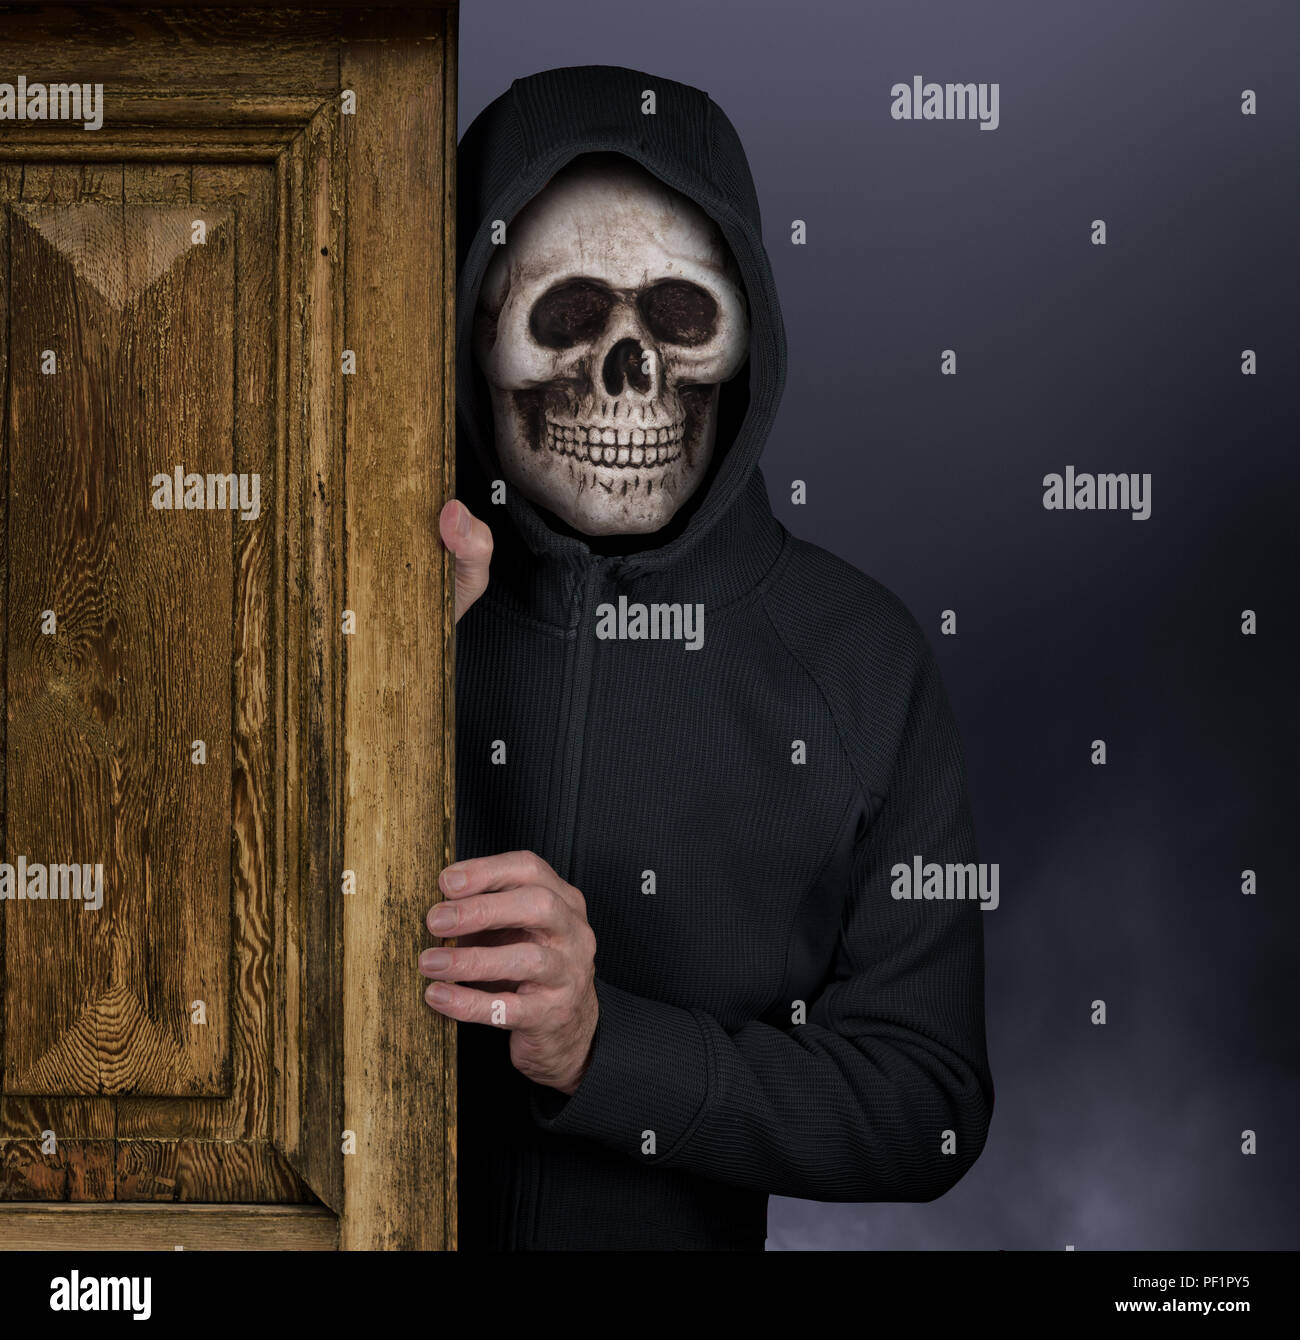 Halloween theme of man with skull mask welcoming to haunted house Stock Photo